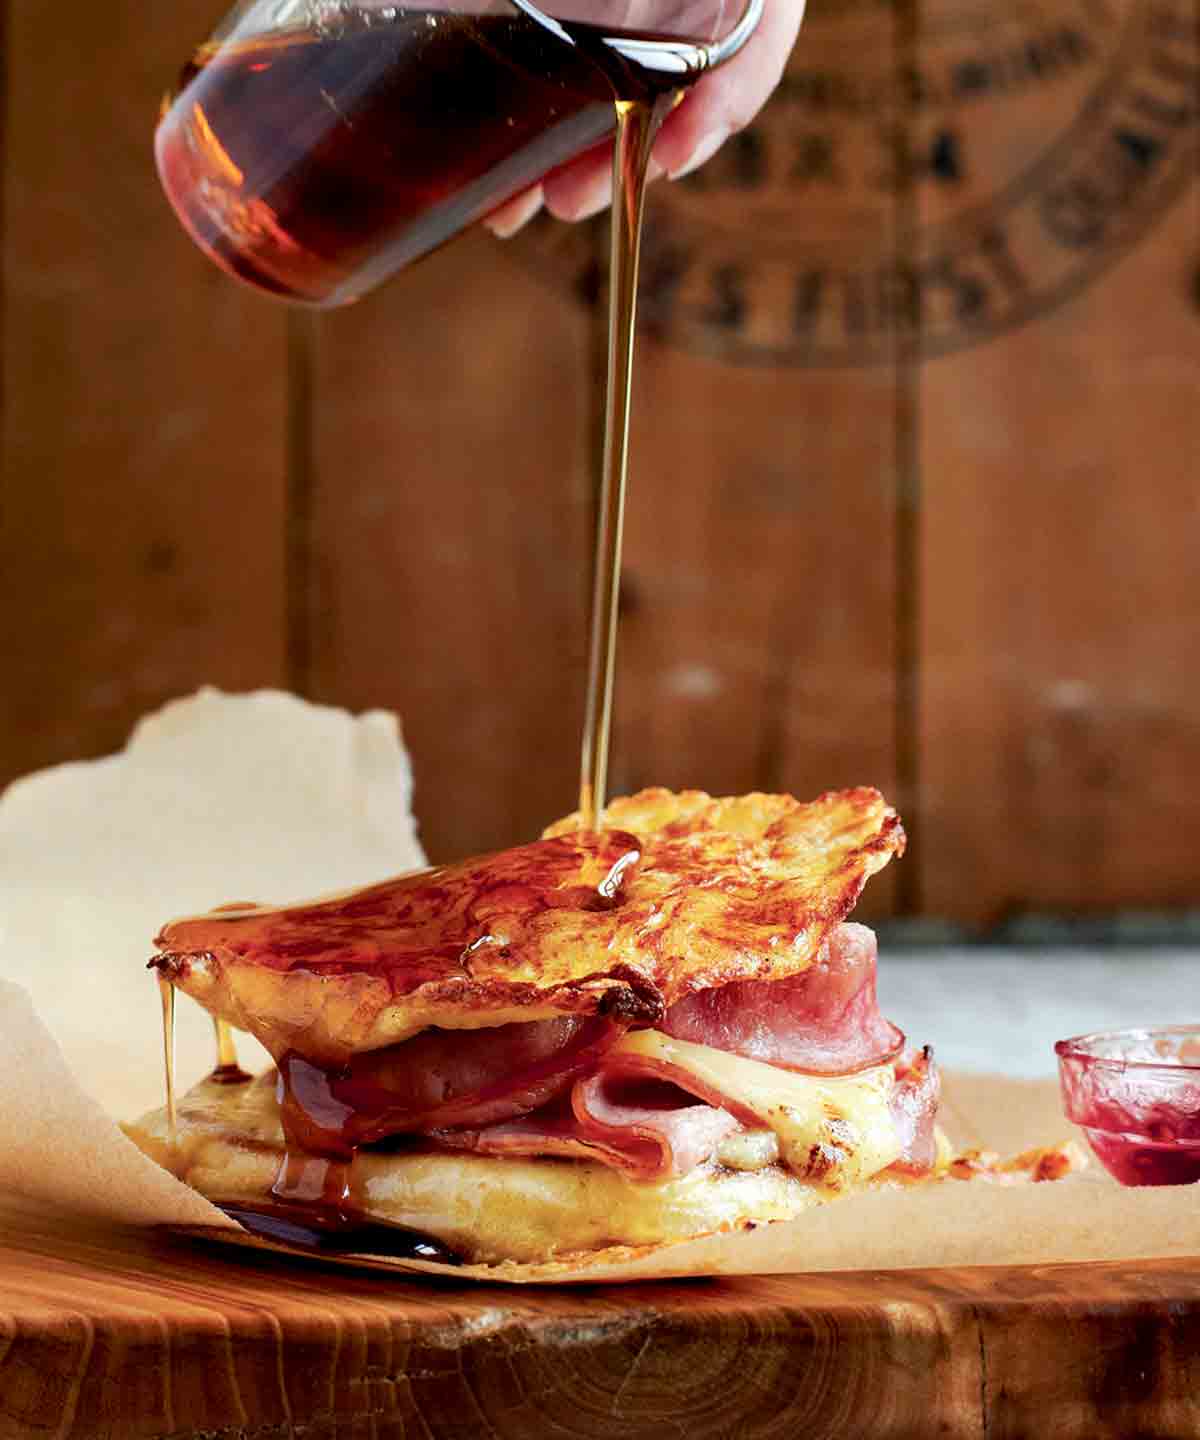 Maple syrup is poured over a Monte Cristo sandwich placed on a piece of parchment paper.